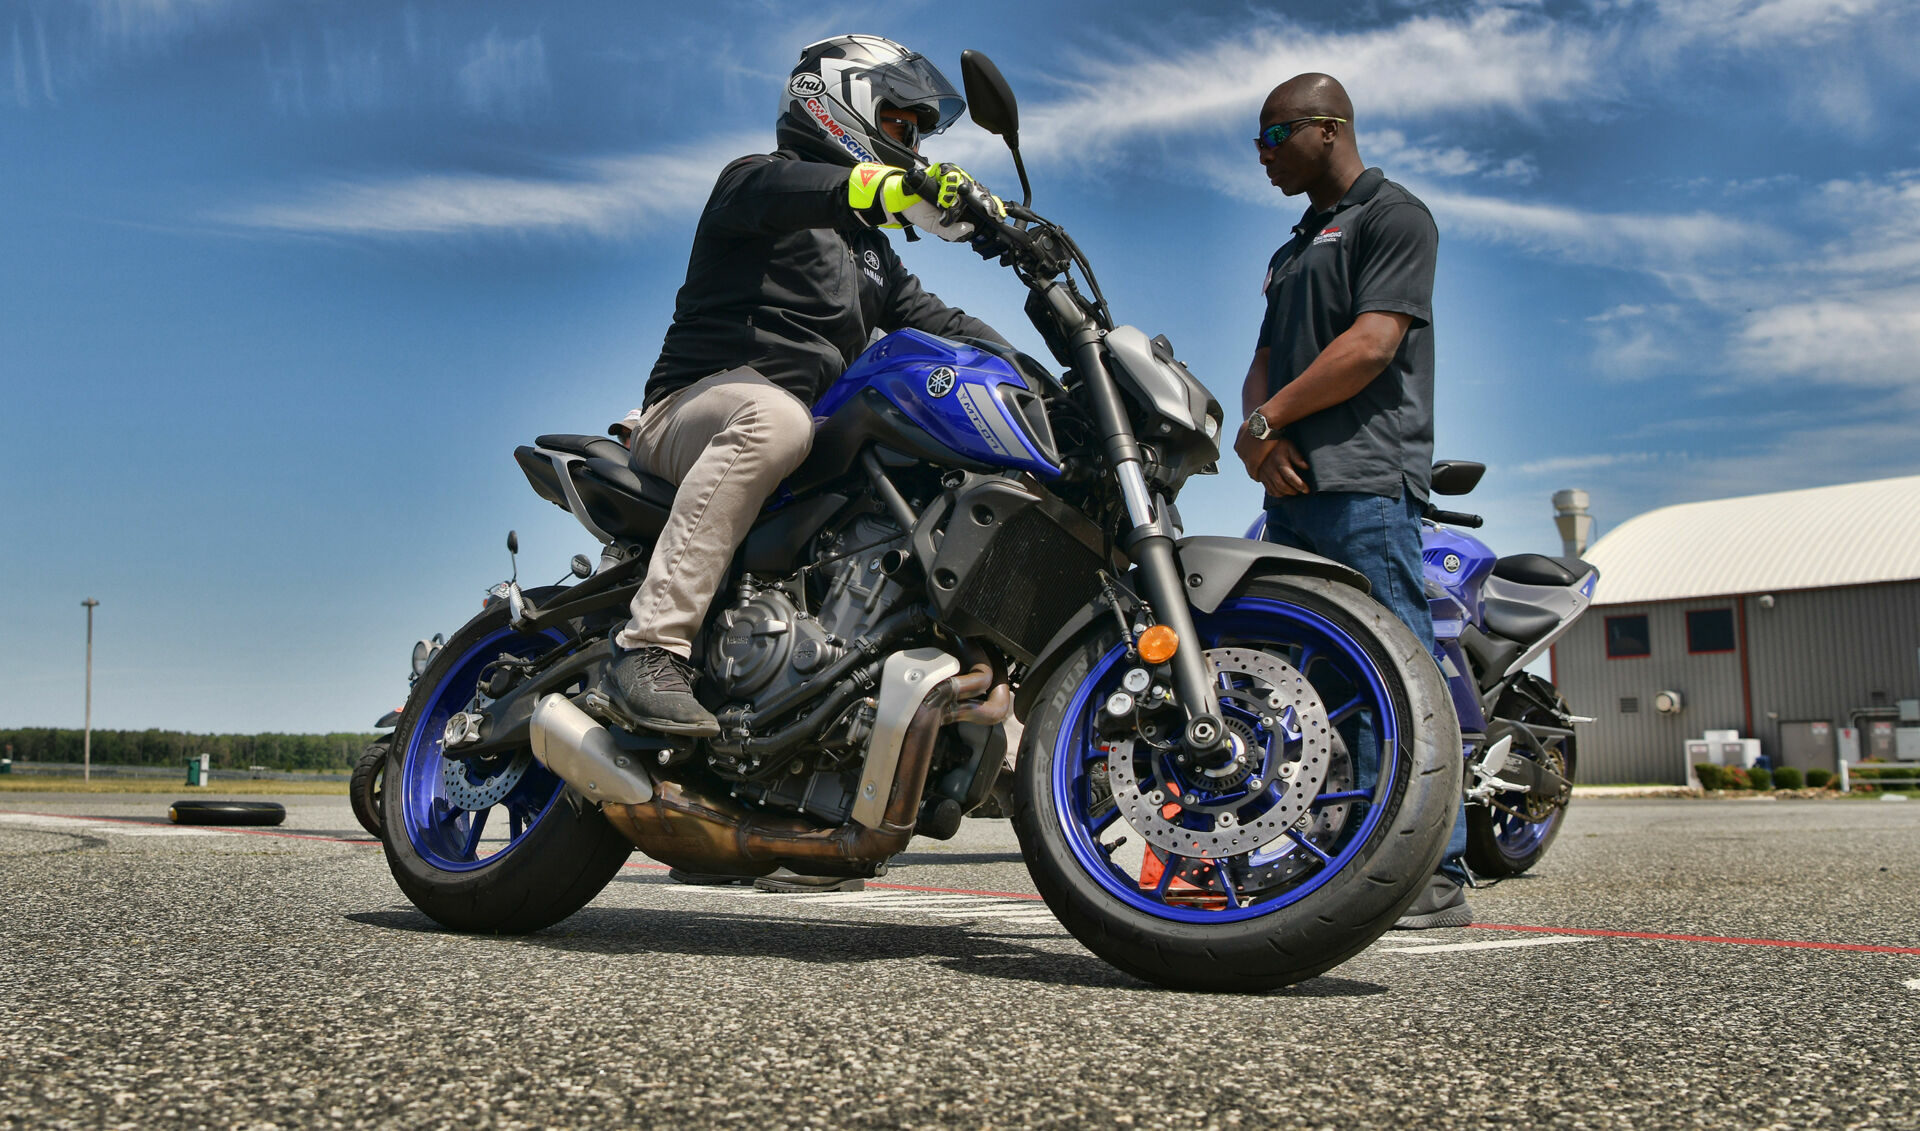 A student working with a Yamaha Champions Riding School instructor. Photo by The SBImage.